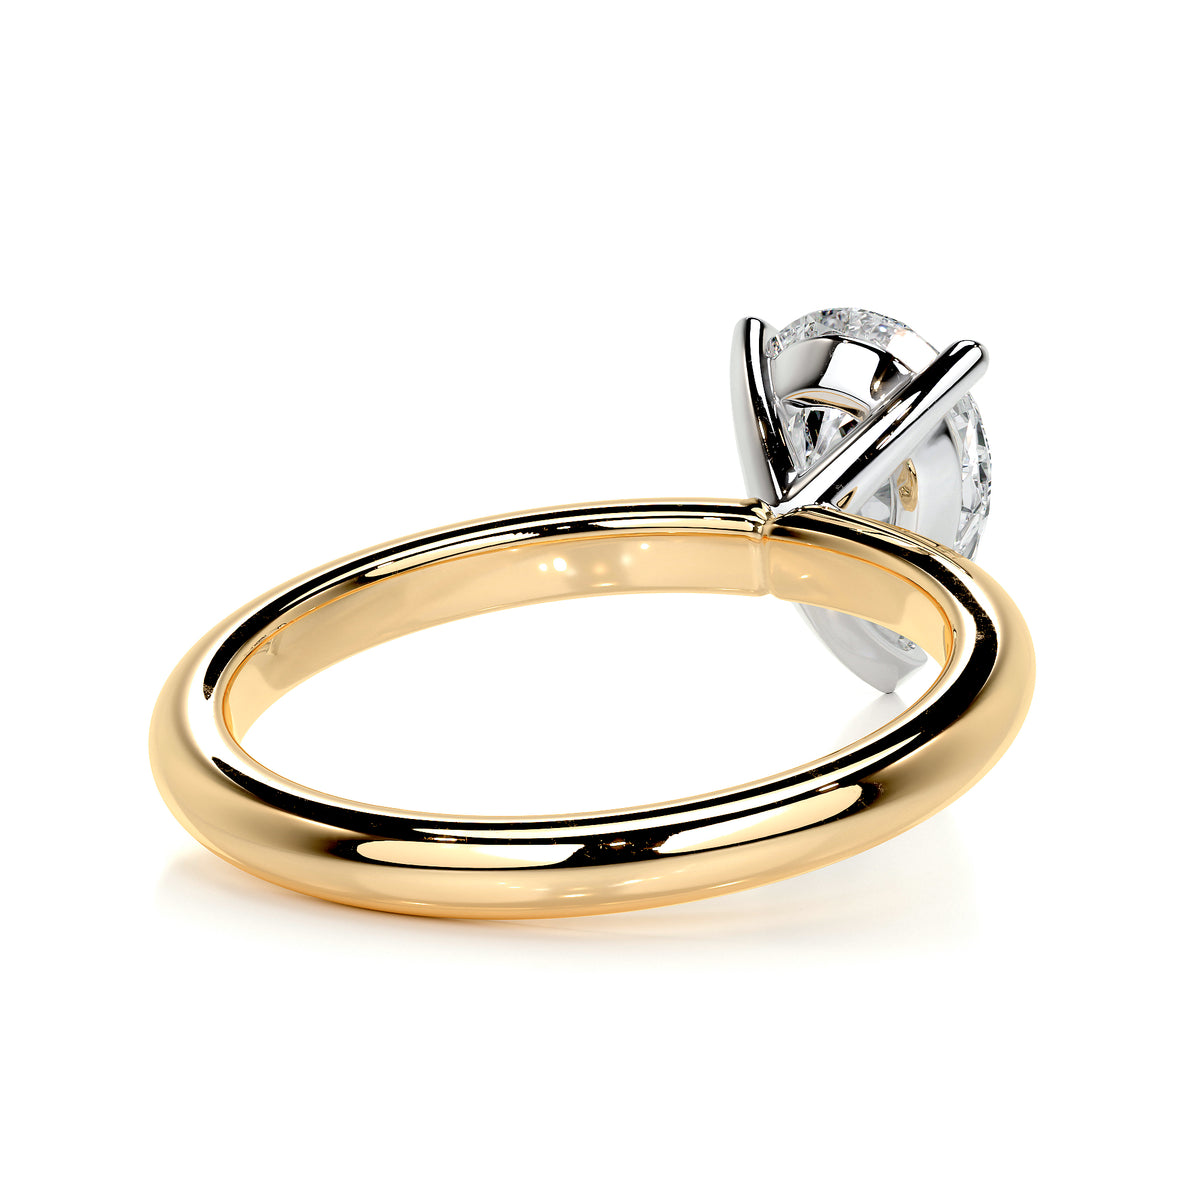 Minimalist Solitaire Engagement Ring